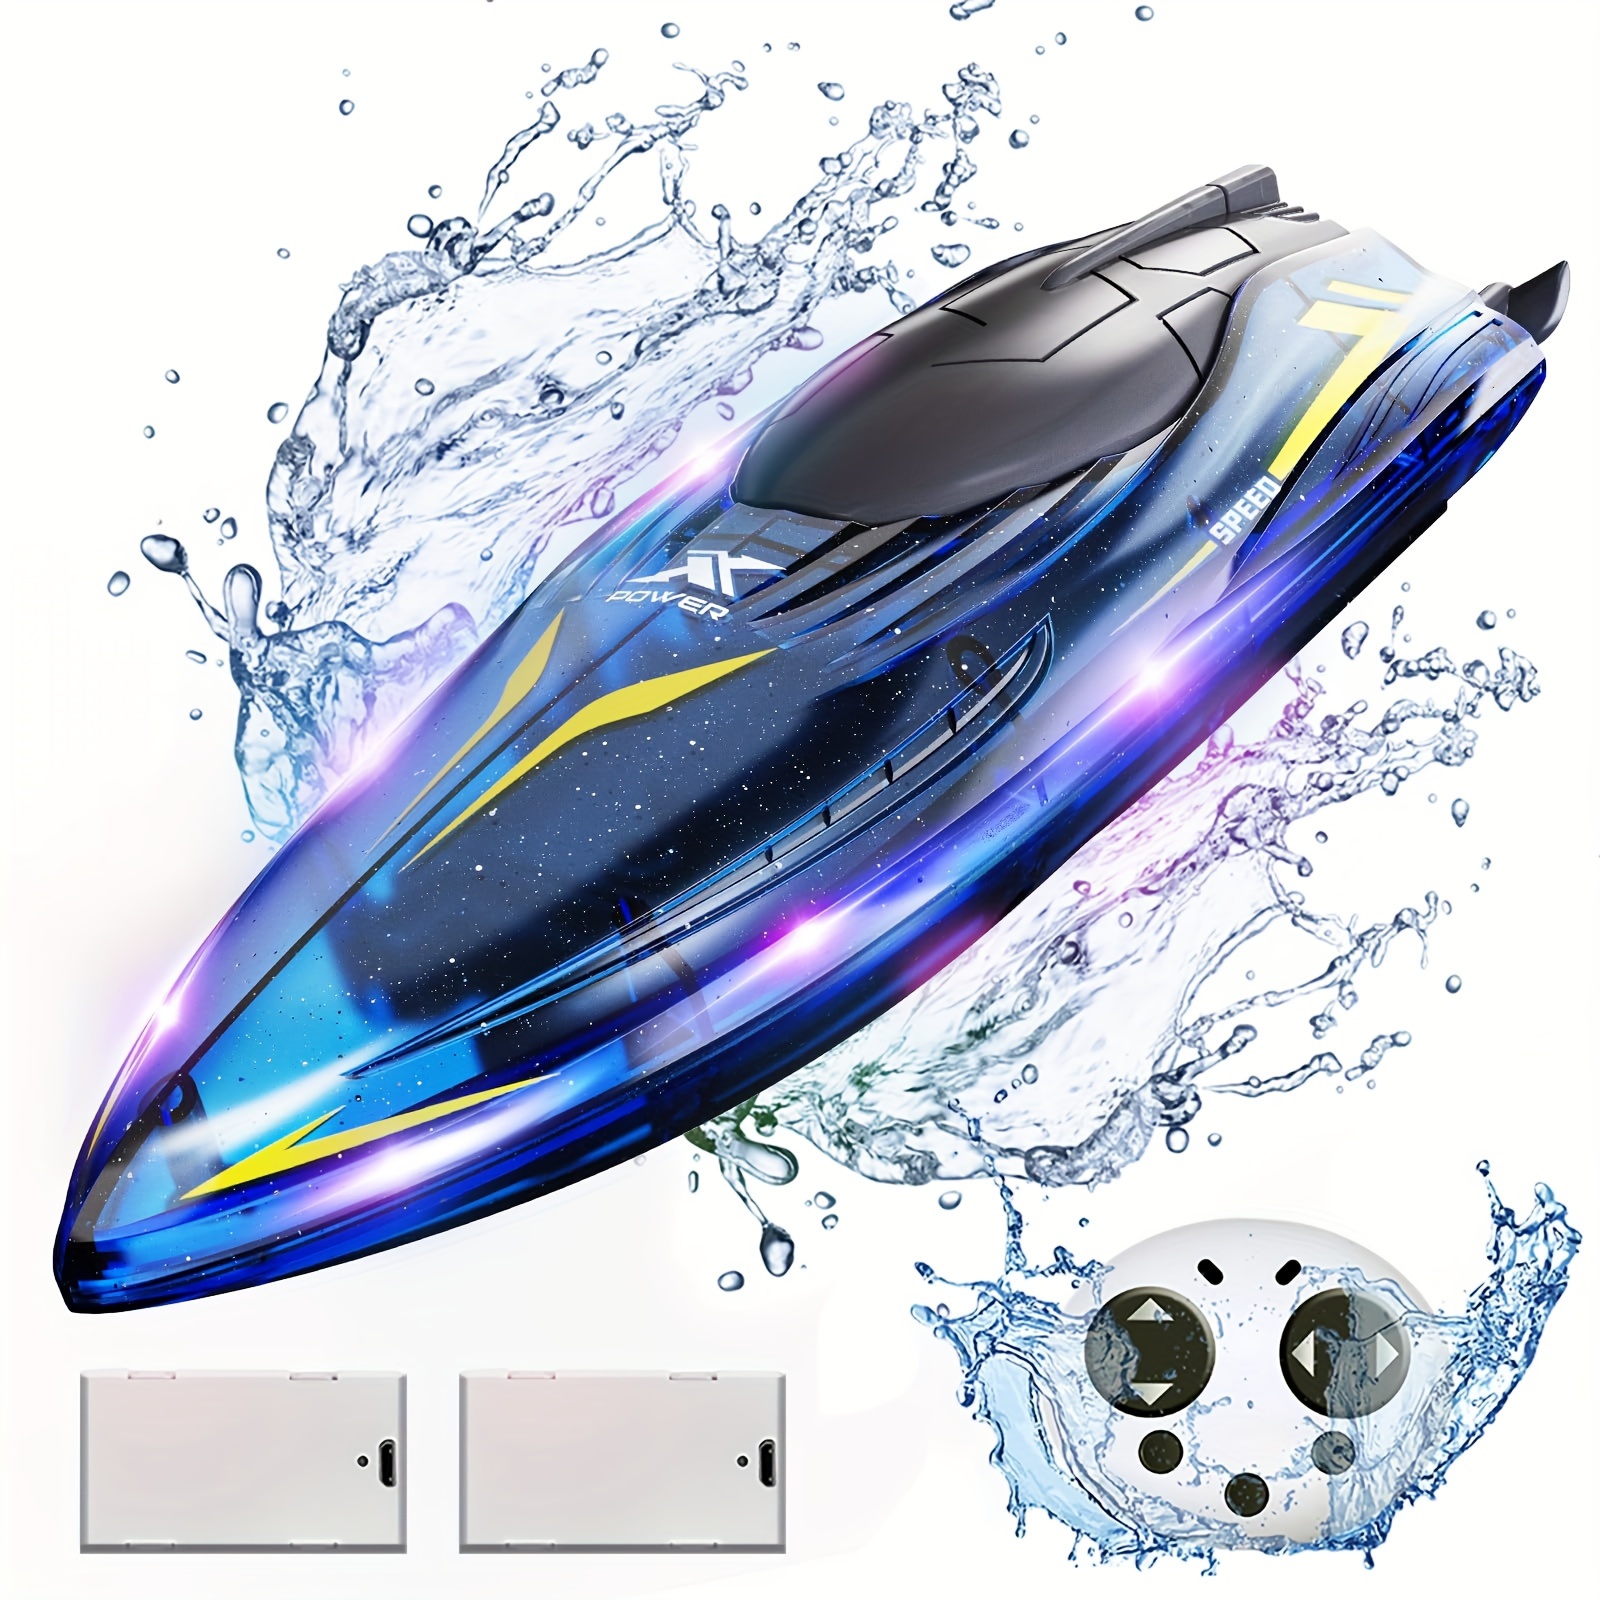 

Tecnock Rc Boat With Led Lights- 2.4ghz Remote Control Boat For Pool And Lakes, 360° Flip Stunt Racing Boats With 2 Modular Rechargeable Battery, Gifts For 8-12 Boys Girls Kids